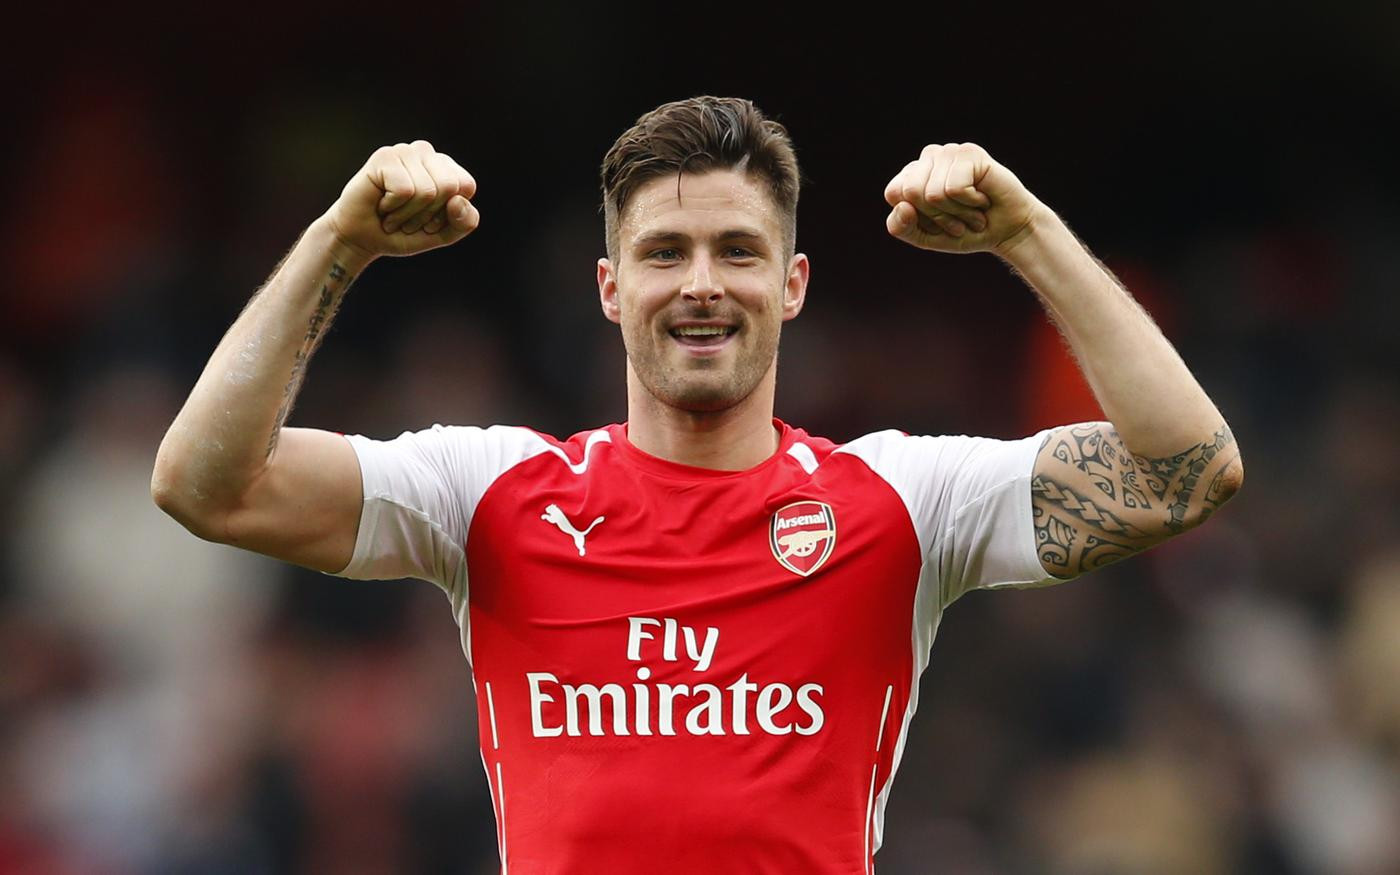 football-arsenals-olivier-giroud-celebrates-after-the-game.jpg